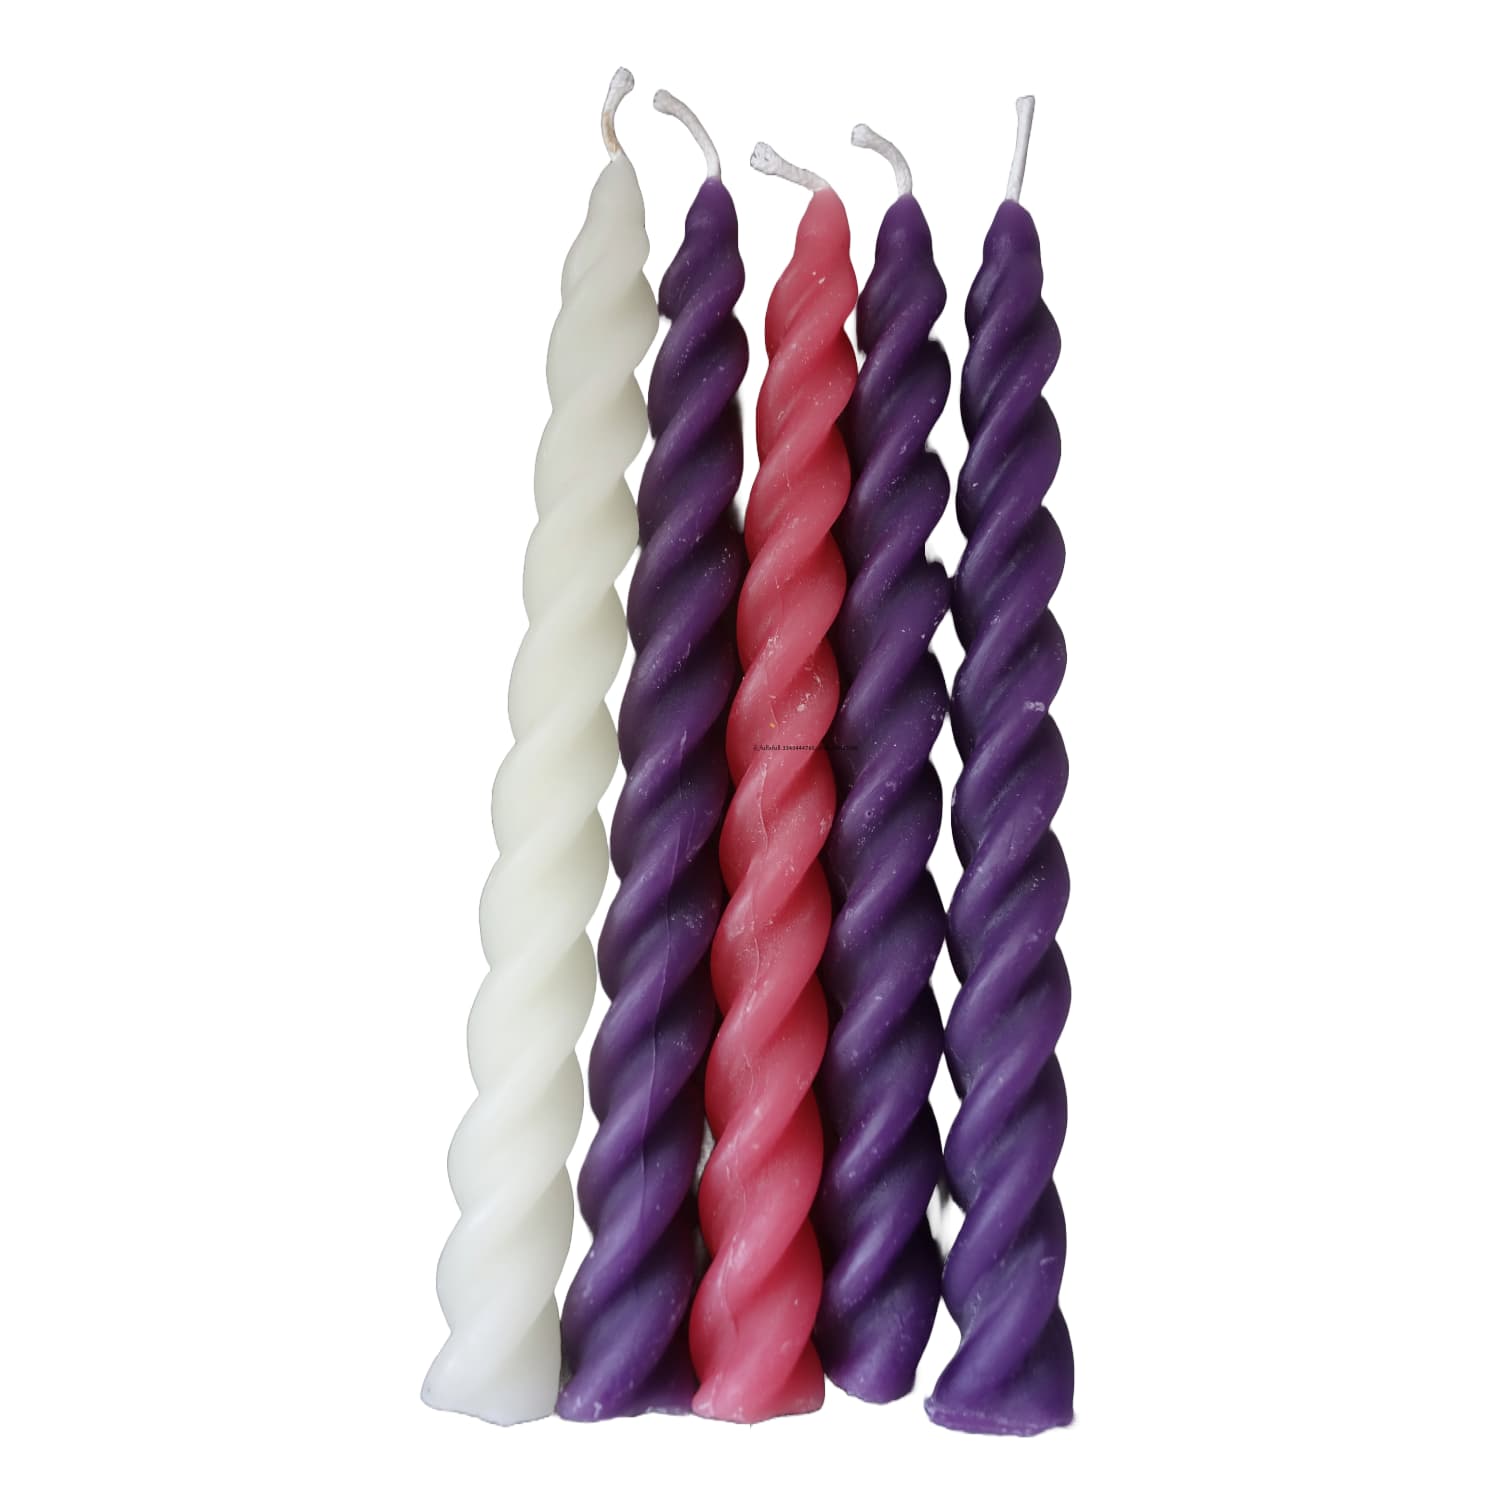 Advent candles pure beeswax twisted spiral candles 7.25 inches